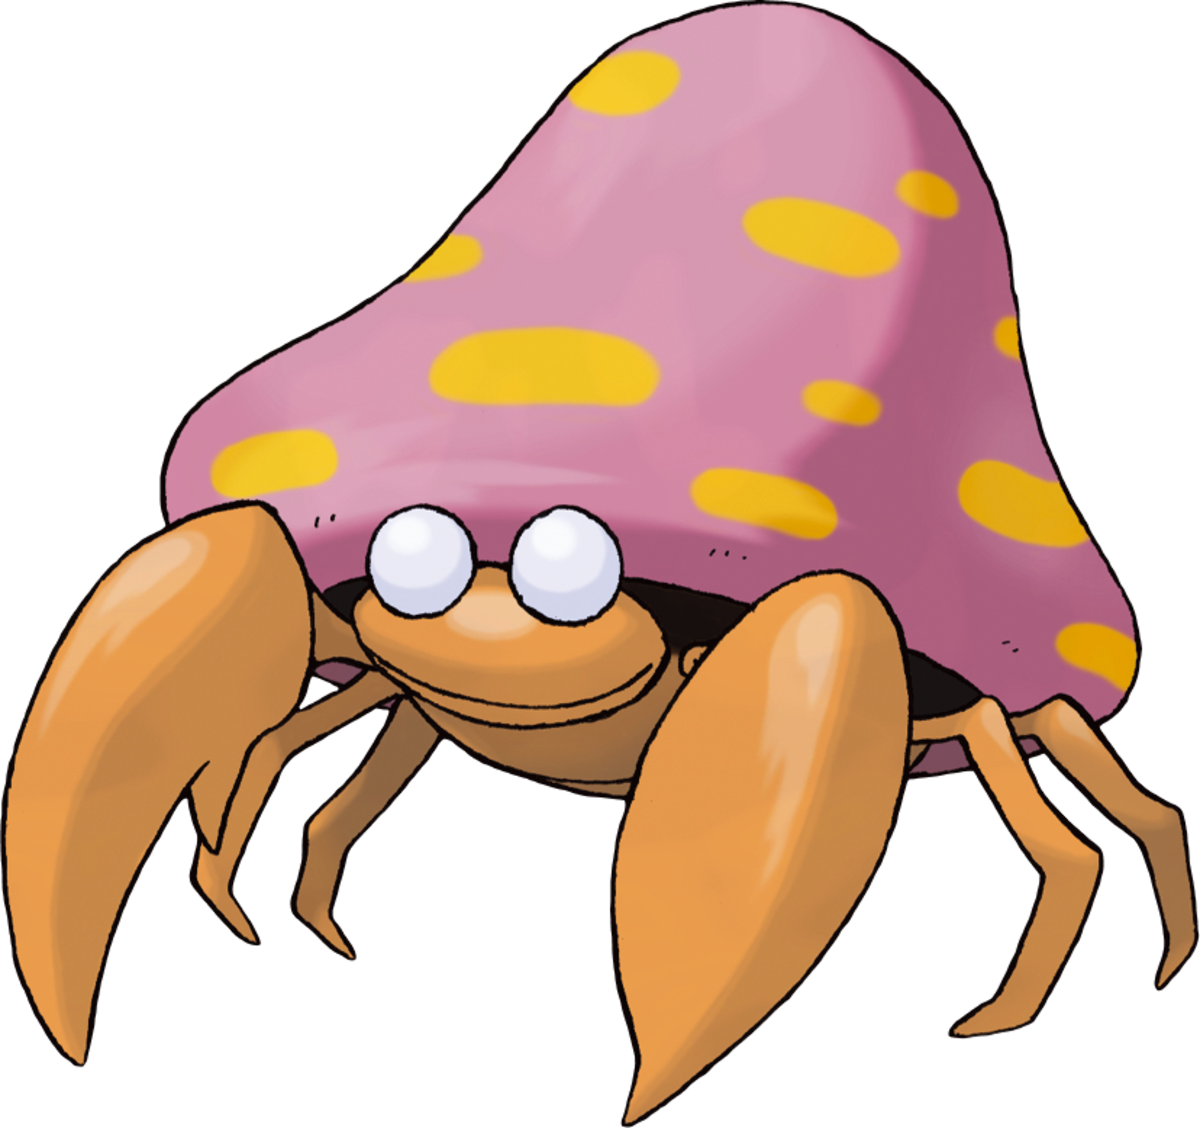 The bug host is drained of energy by the mushroom on its back. The mushroom does all of the thinking.